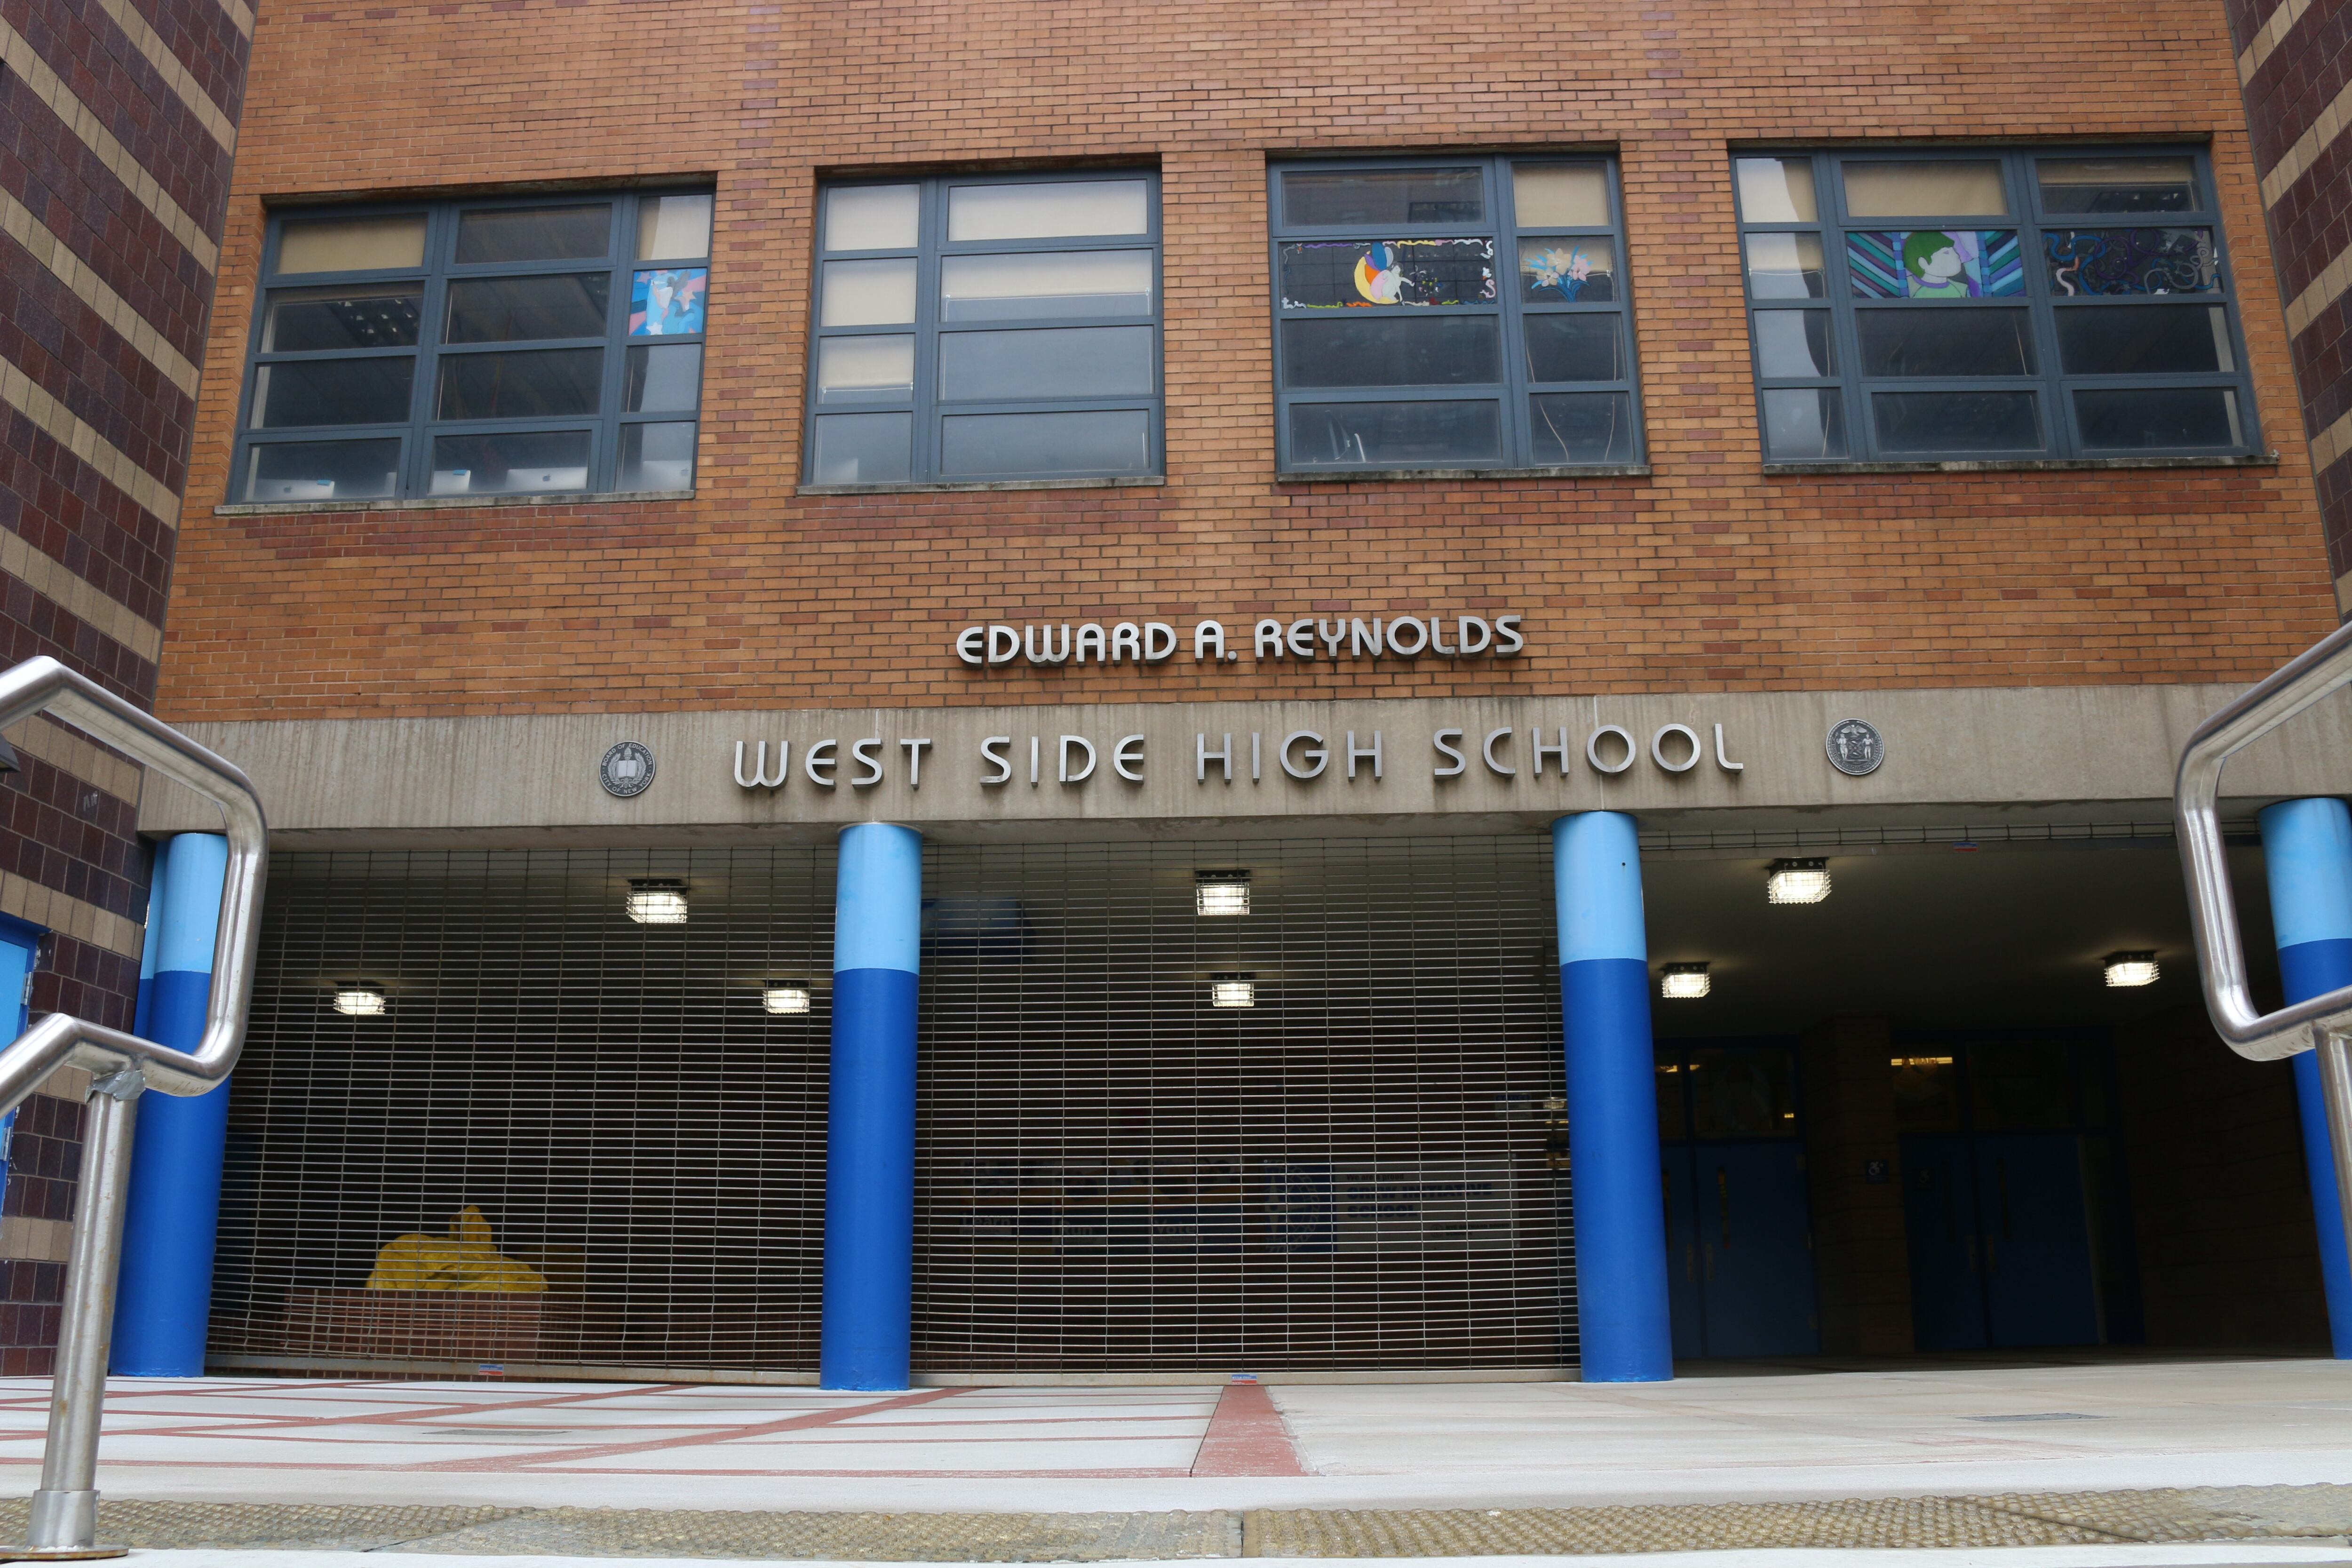 A brick building with blue columns and a sign that reads "West Side High School" on the top.